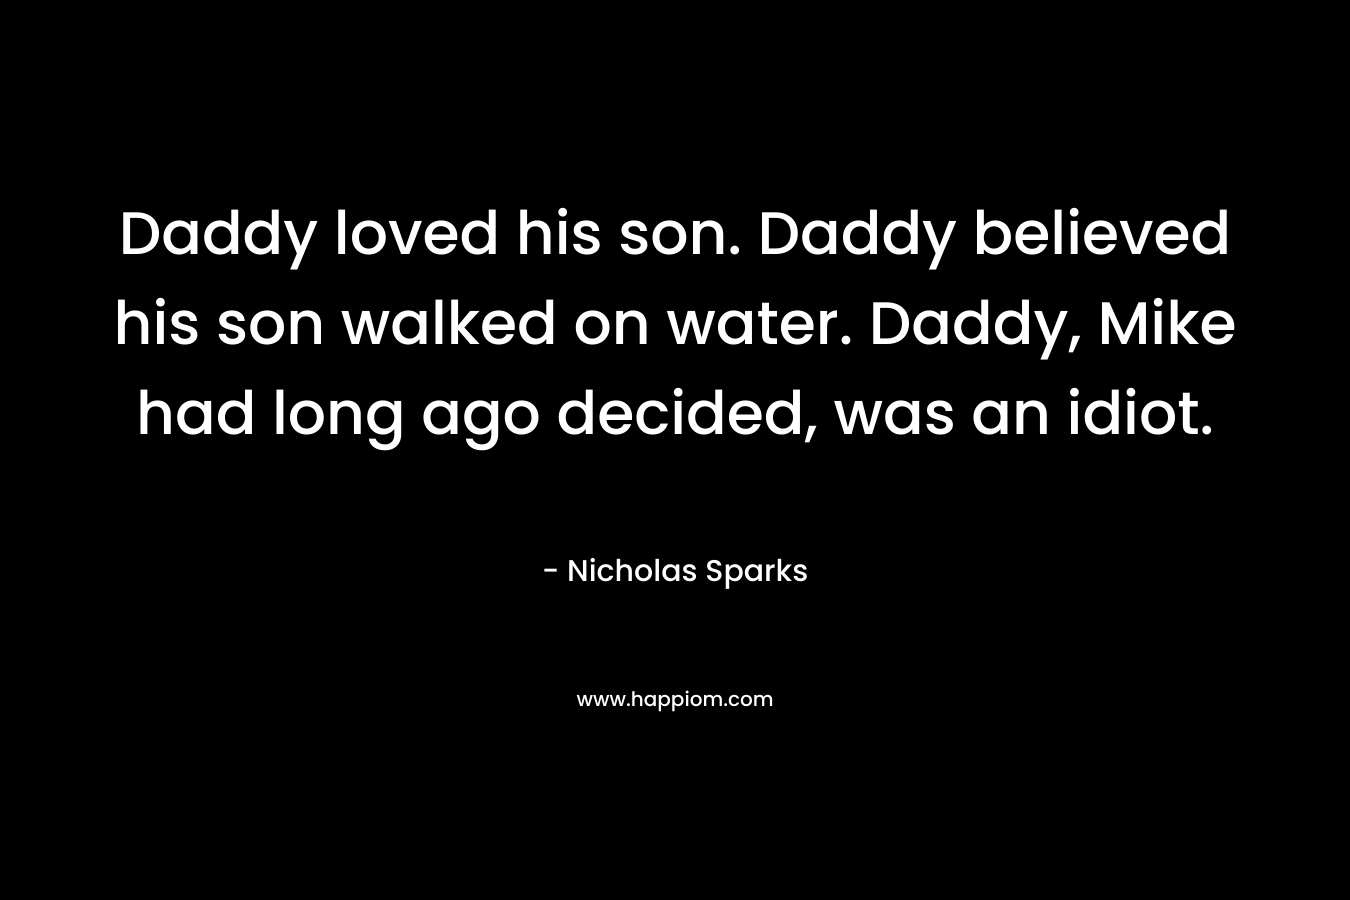 Daddy loved his son. Daddy believed his son walked on water. Daddy, Mike had long ago decided, was an idiot.